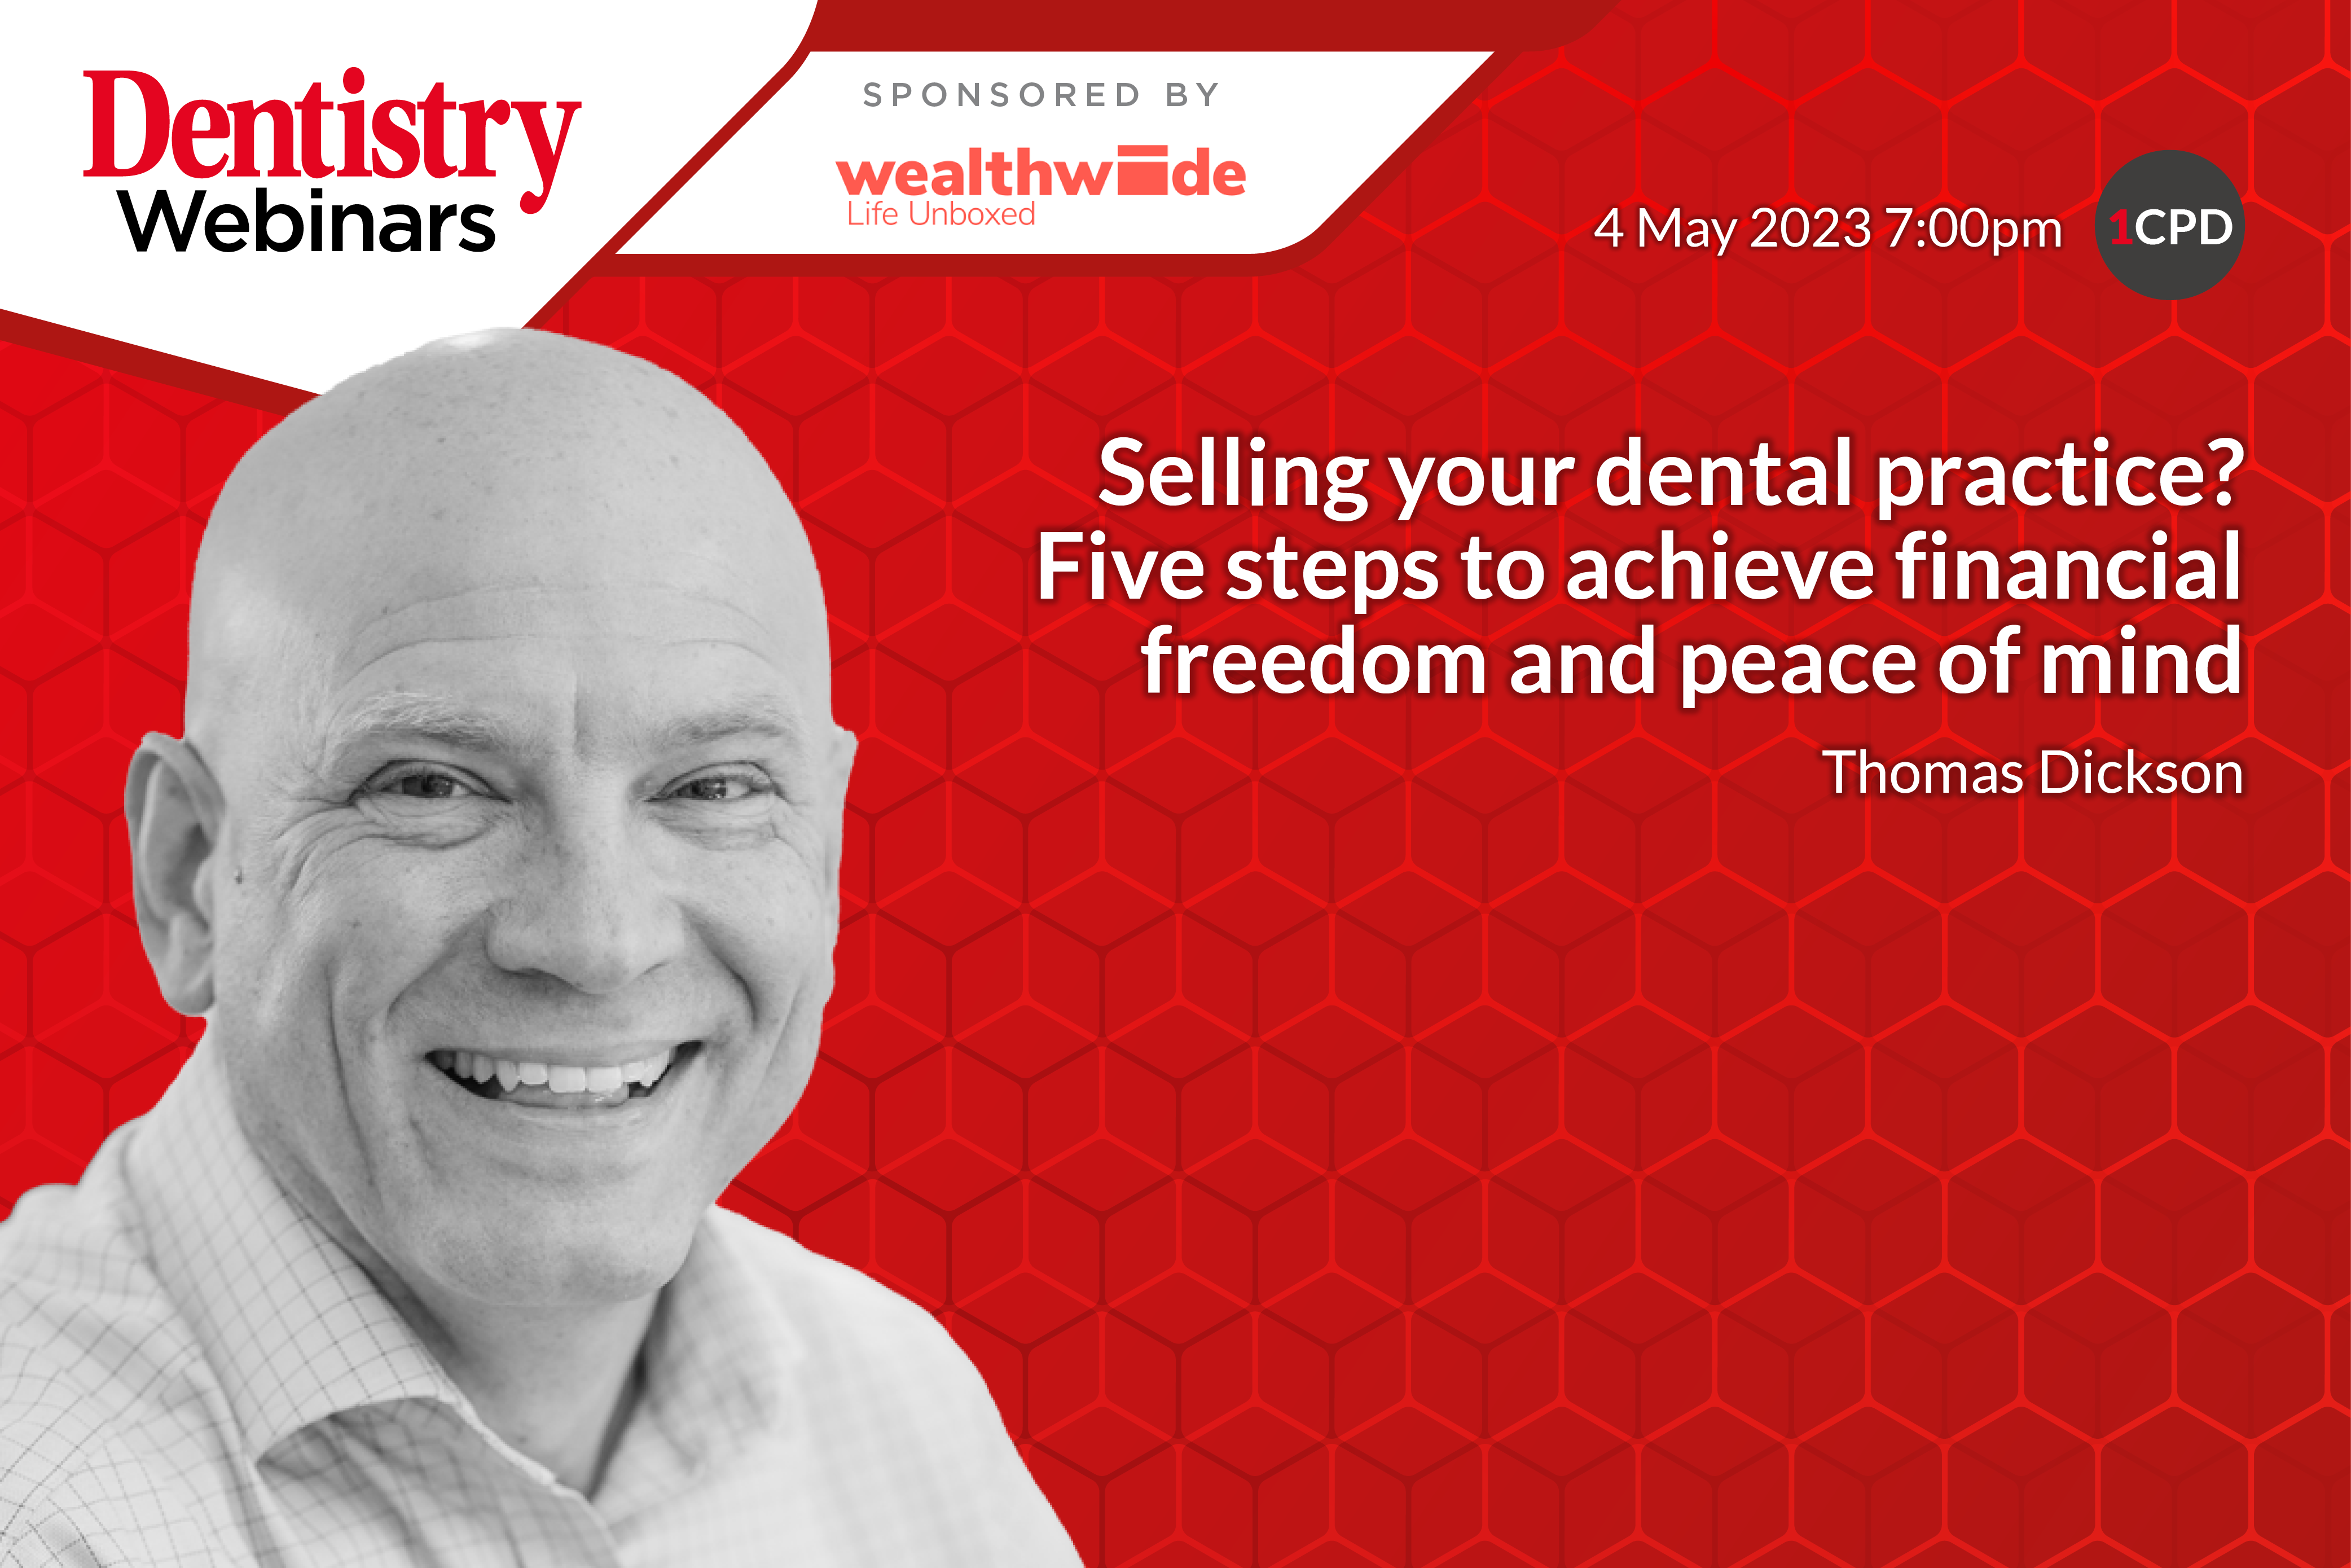 https://dentistry.co.uk/webinar/selling-your-dental-practice-five-steps-to-achieve-financial-freedom-and-peace-of-mind-for-the-rest-of-your-life/